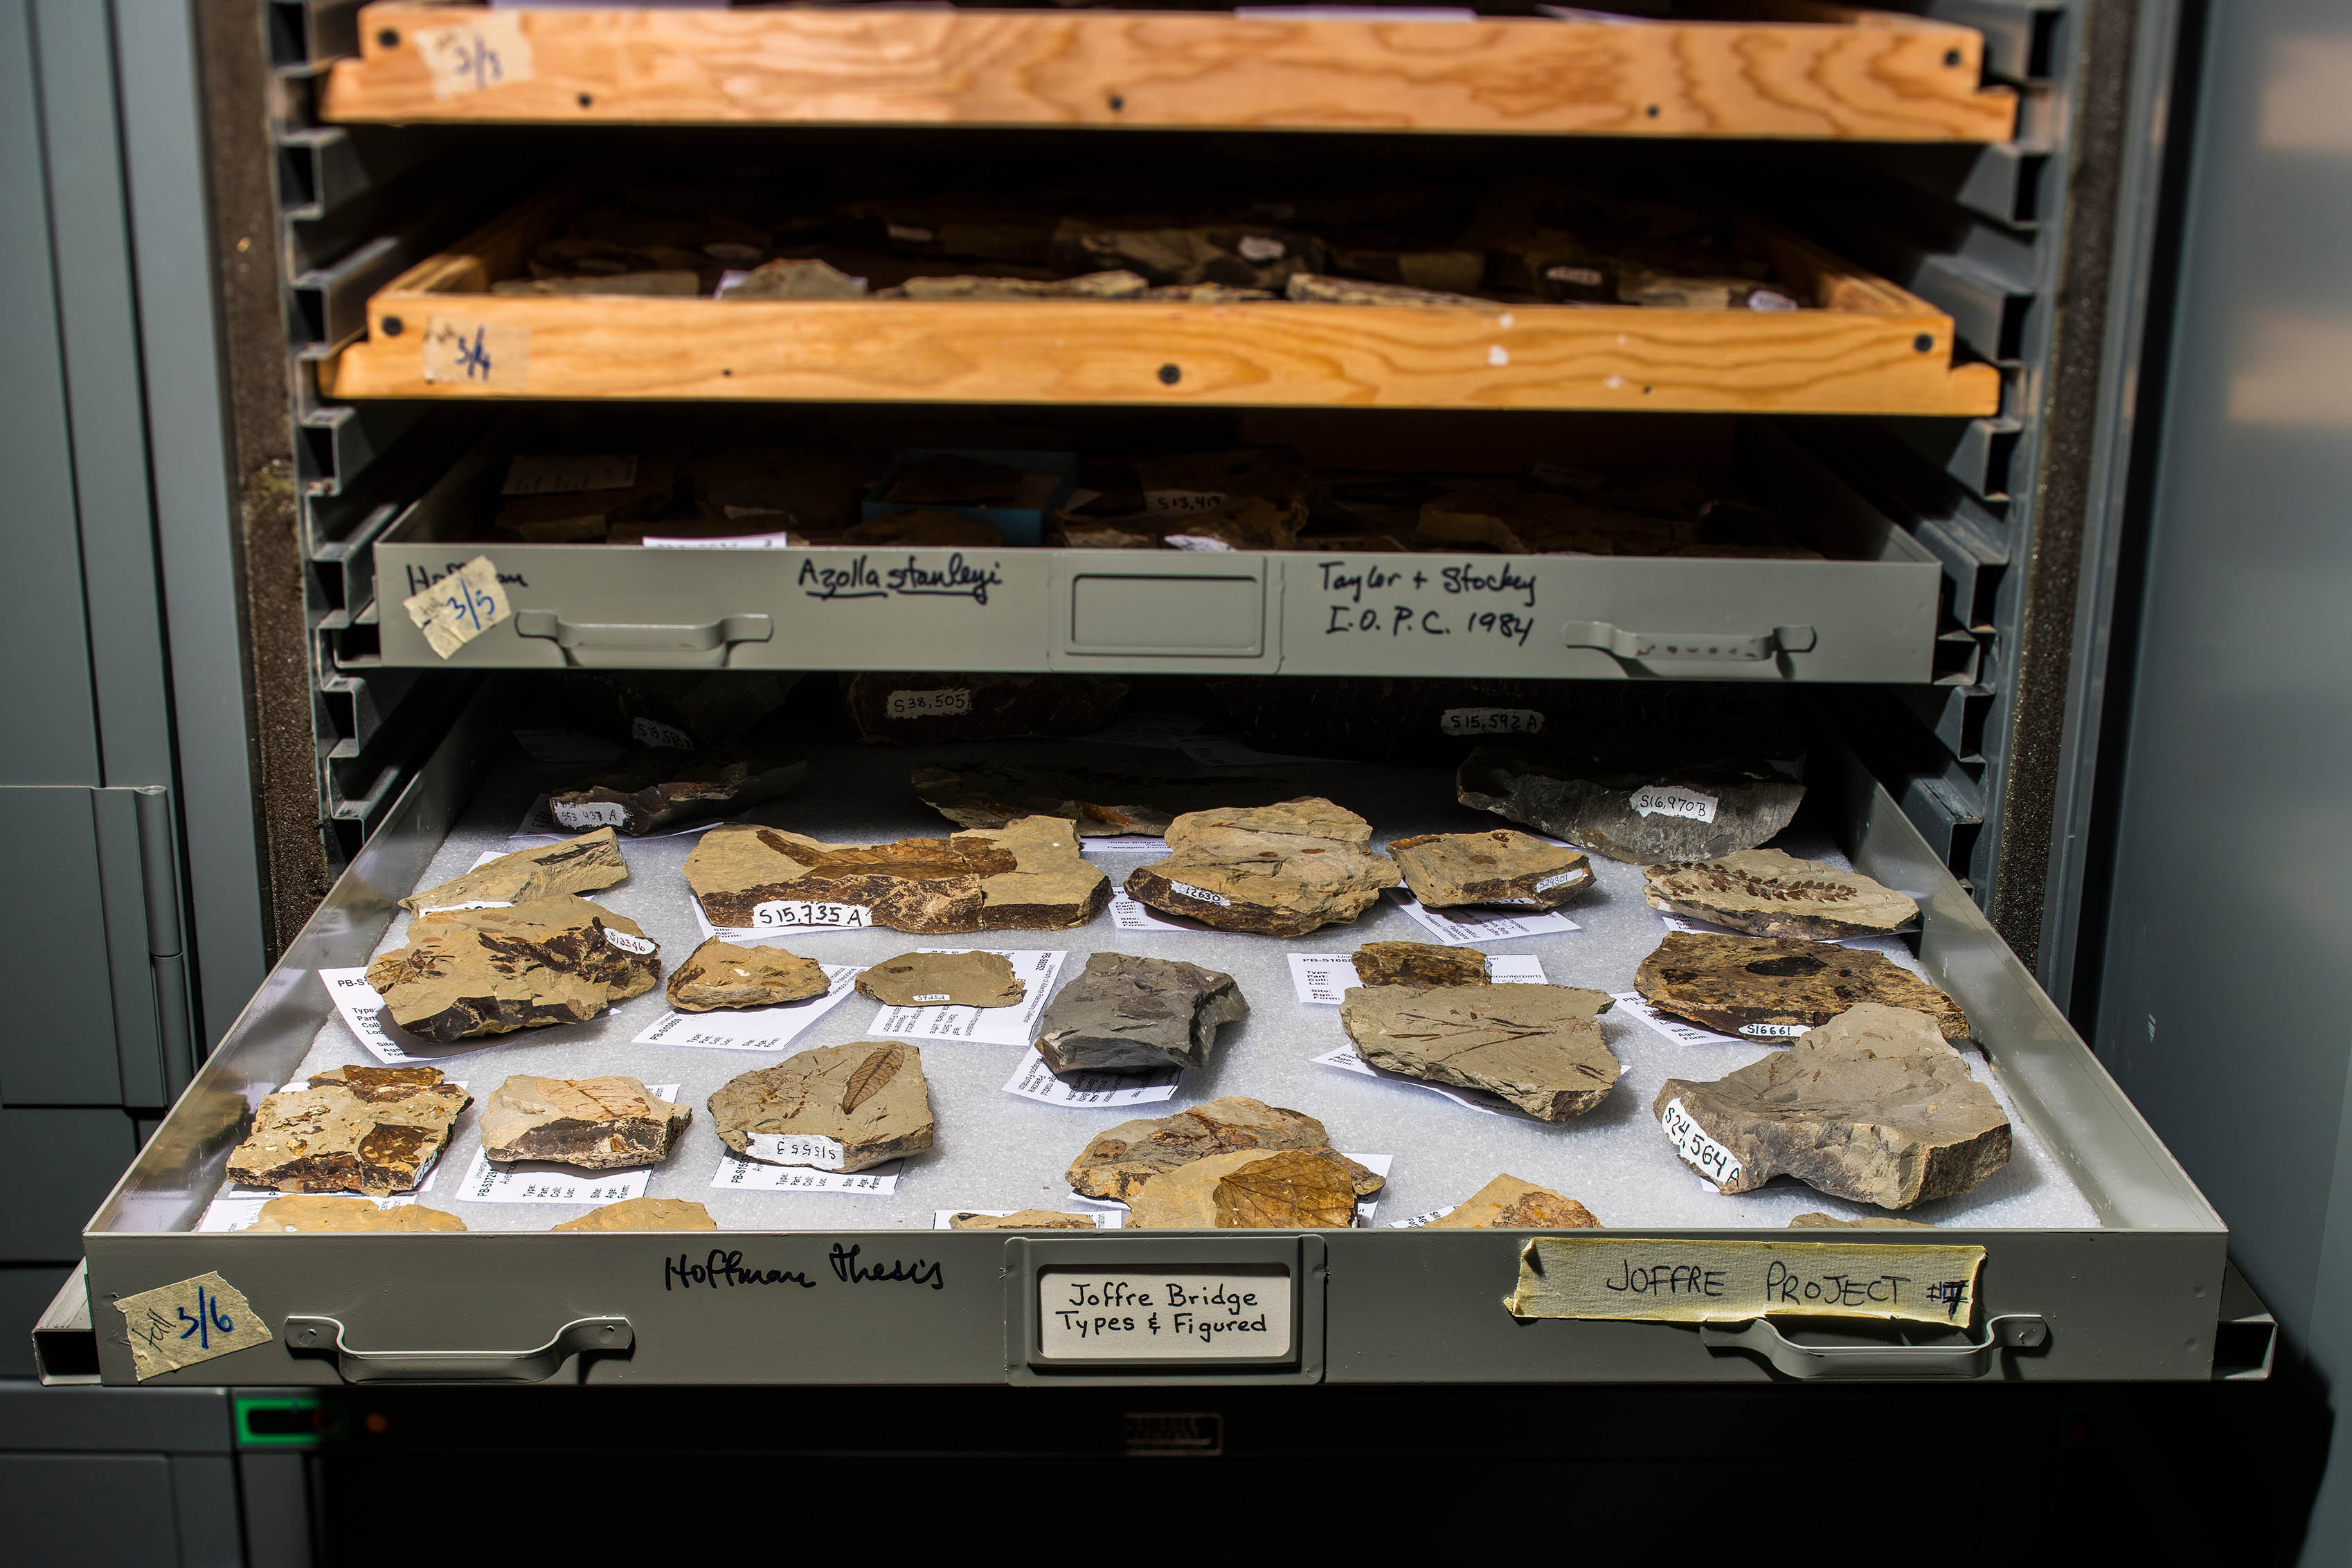 Plant fossils stored in a shallow drawer that extends from a metal shelving unit.